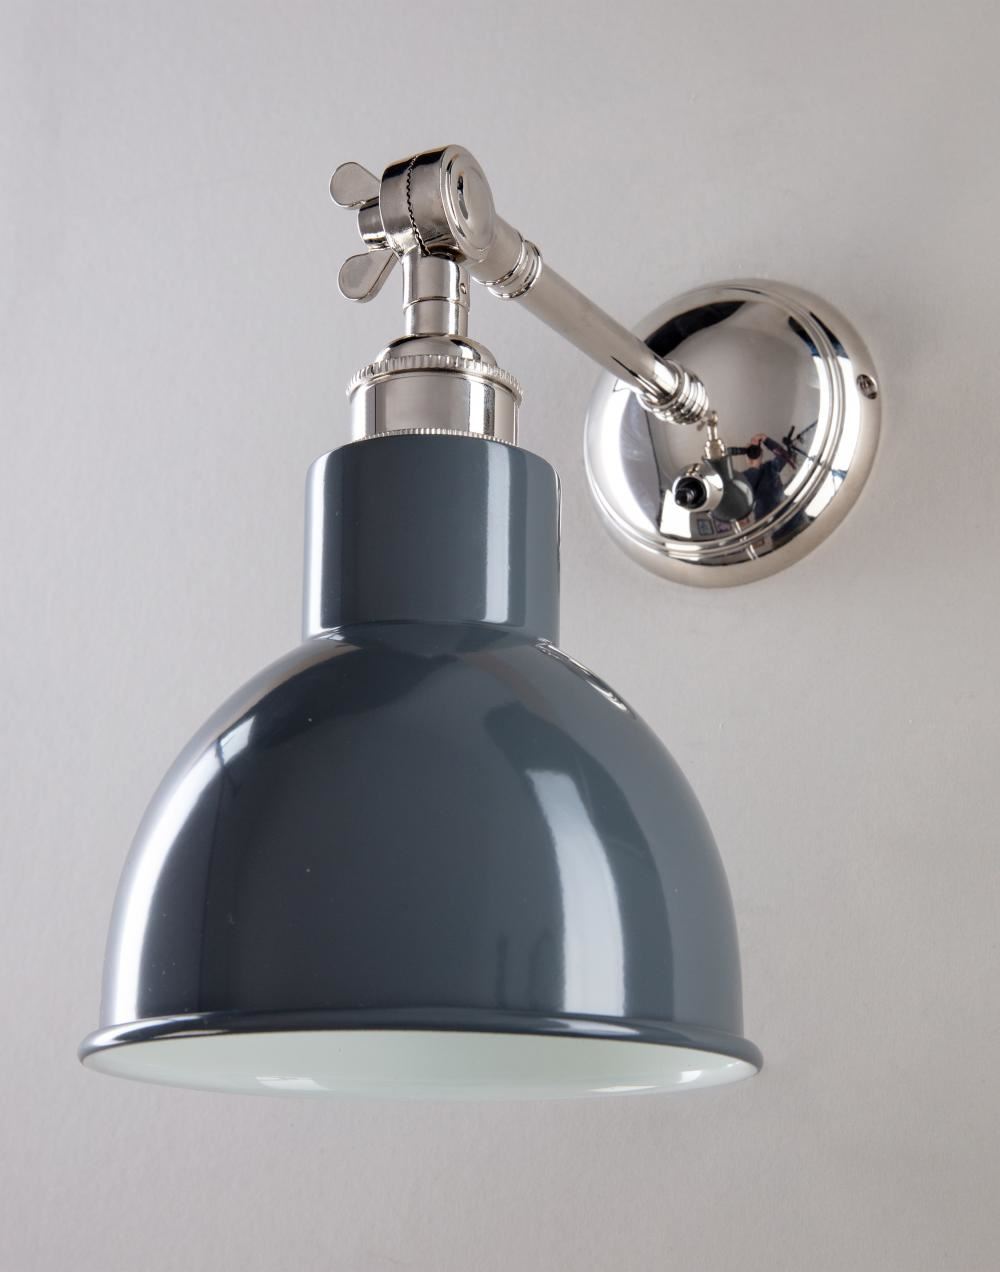 An Old School Electric Churchill Coloured Shades Wall Light with a grey shade on a white wall.